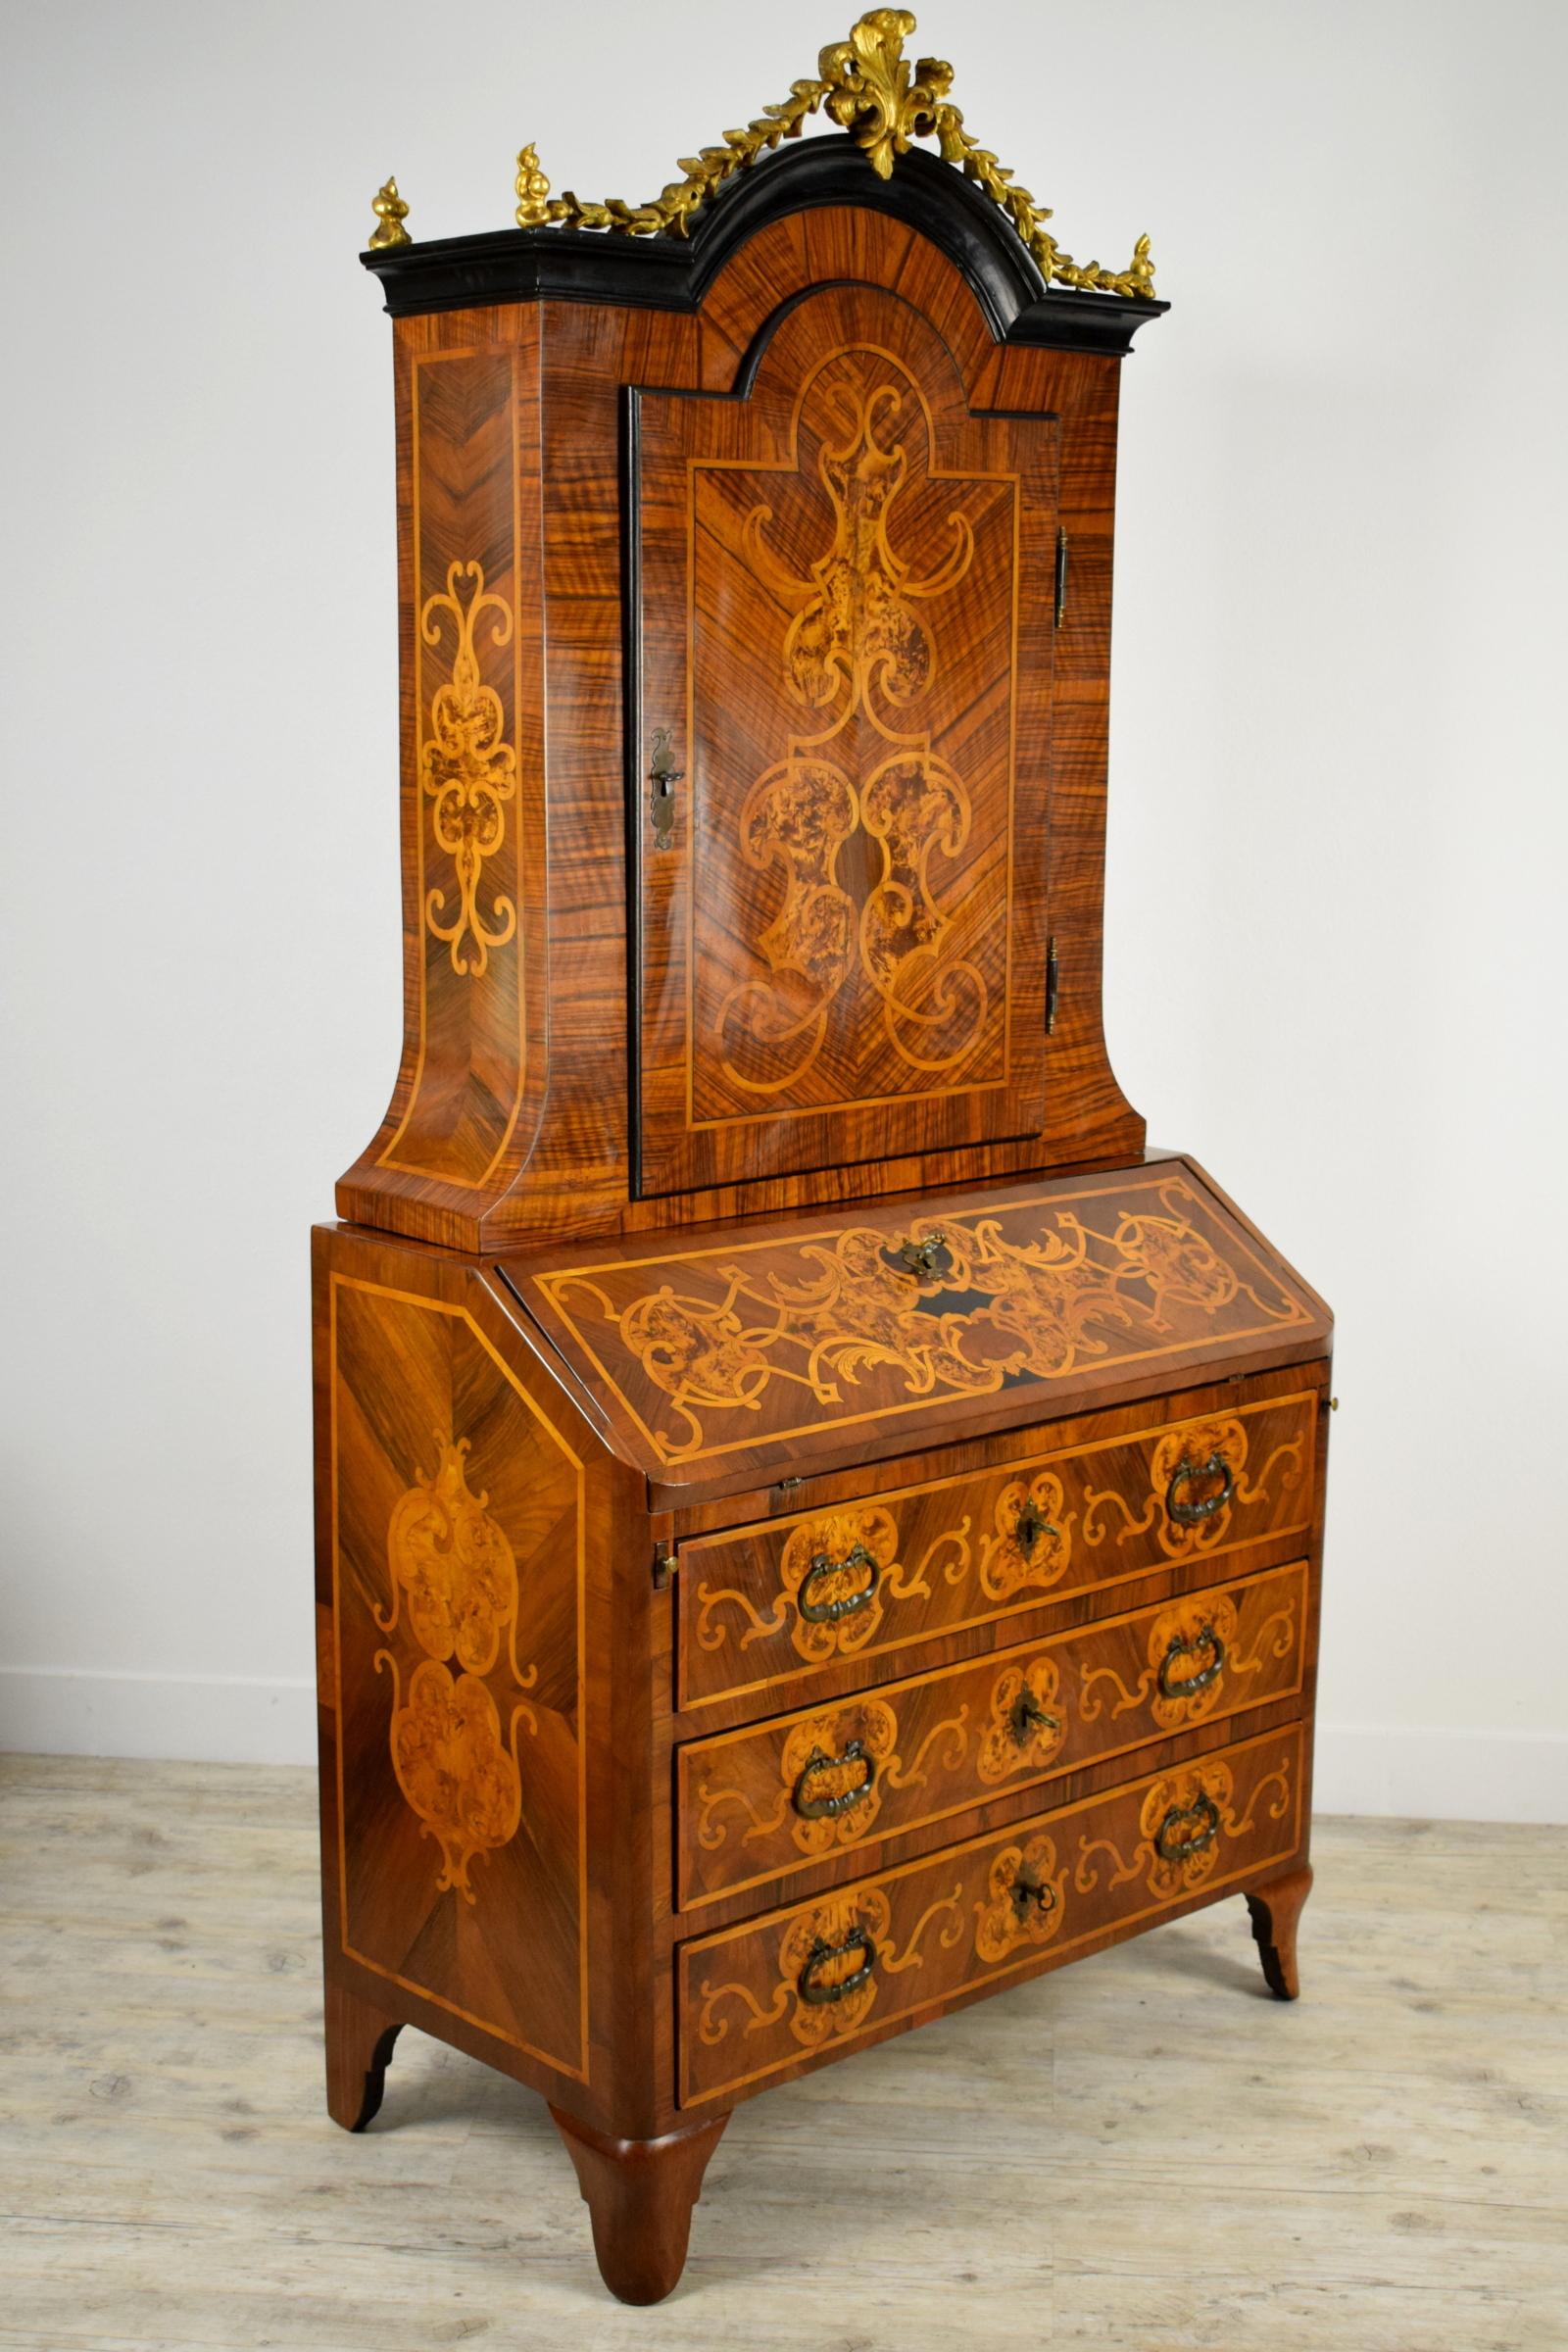 18th century Italian Inlaid wood trumeau 

This small and elegant trumeau, made in Piedmont (north of Italy) in the 18th century, is completely paved with walnut wood and inlaid with boxwood. The inlays that decorate the furniture, creating very